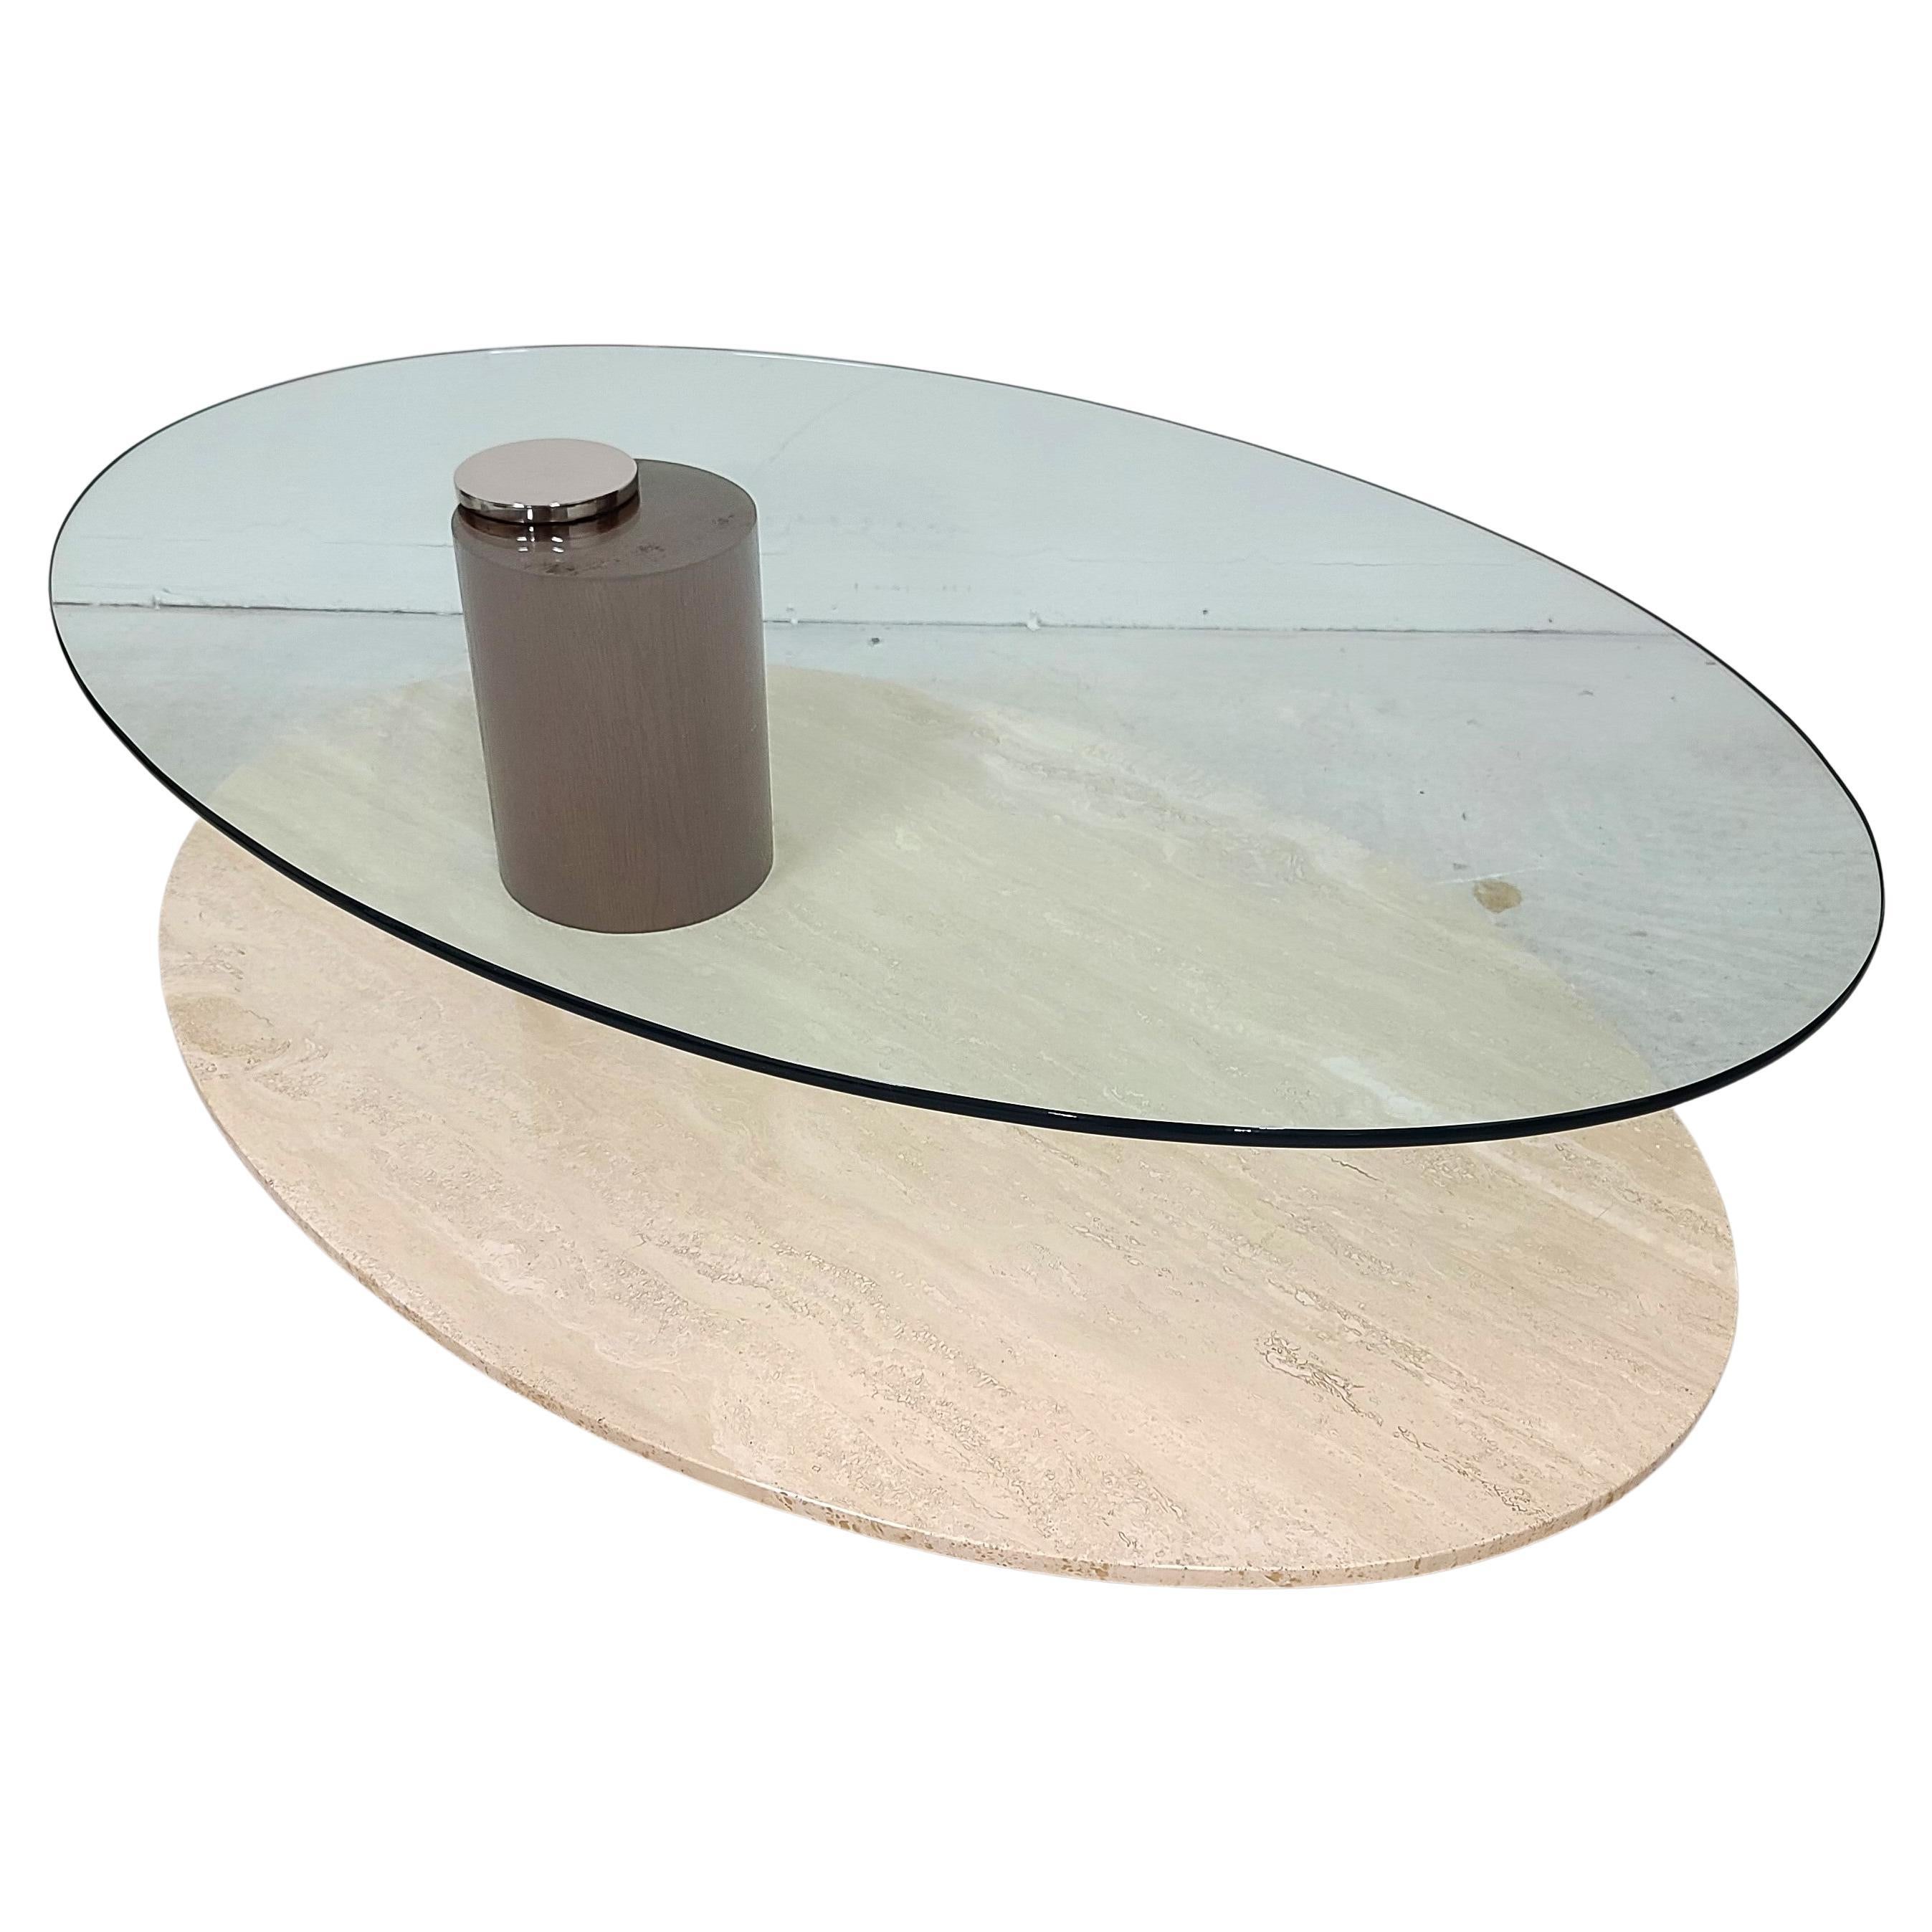 For FULL item description click on READ MORE below. 

Offering One Of Our Recent Palm Beach Estate Fine Furniture Acquisitions Of A

1970's Mid-Century Modern Travertine Marble & Glass Coffee Cocktail Table by Lion in Frost
Glass top swivels 360